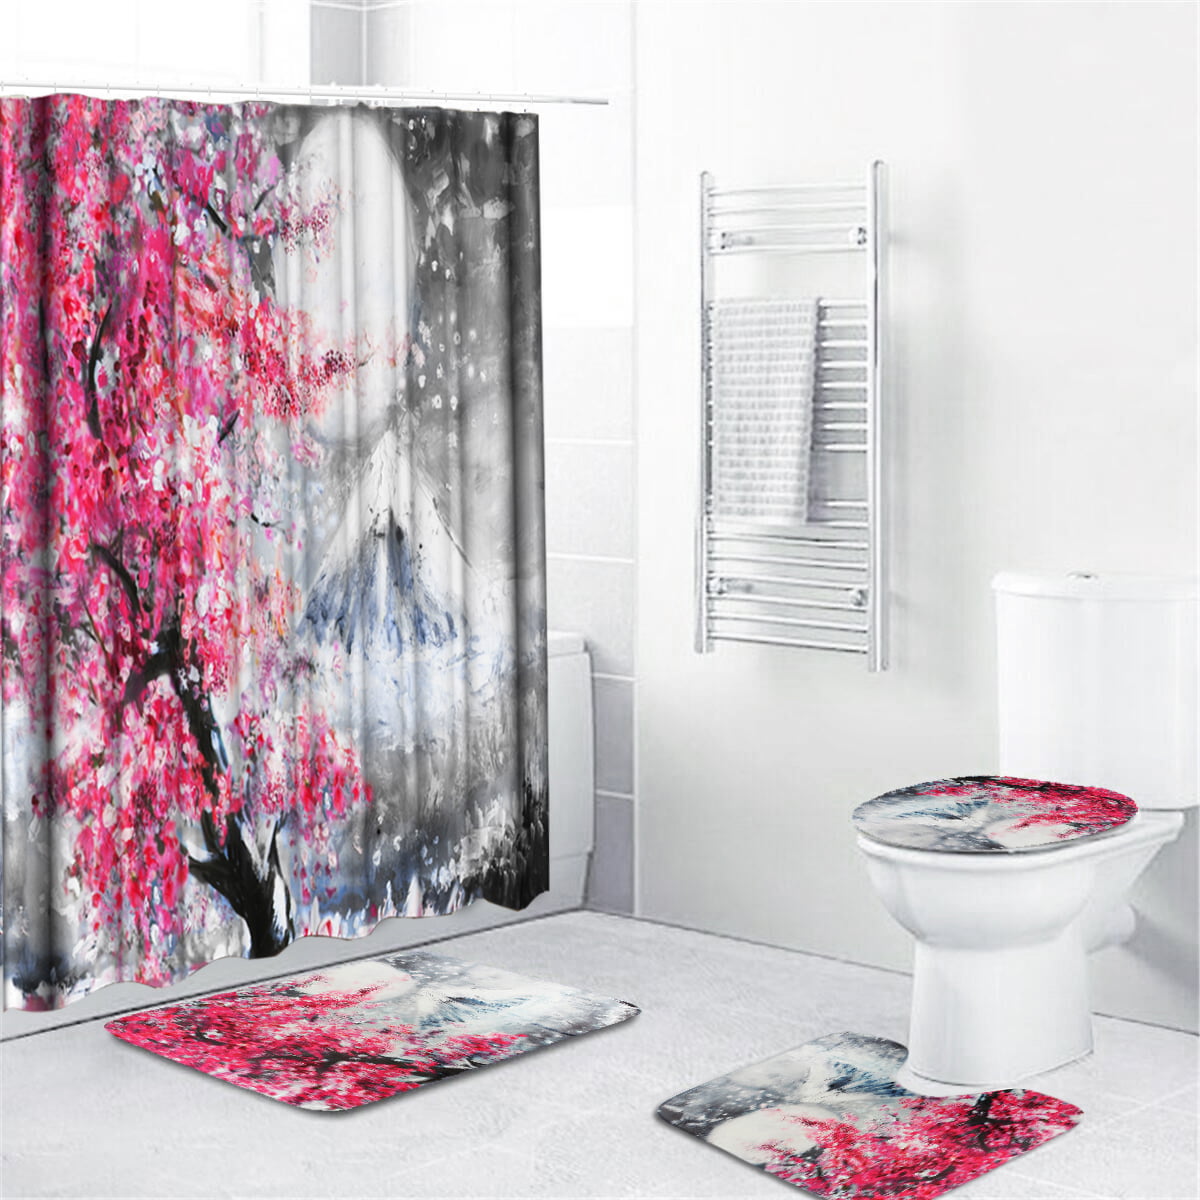 Cherry tree and bicycle Shower Curtain Bathroom Decor Fabric & 12hooks 71*71inch 